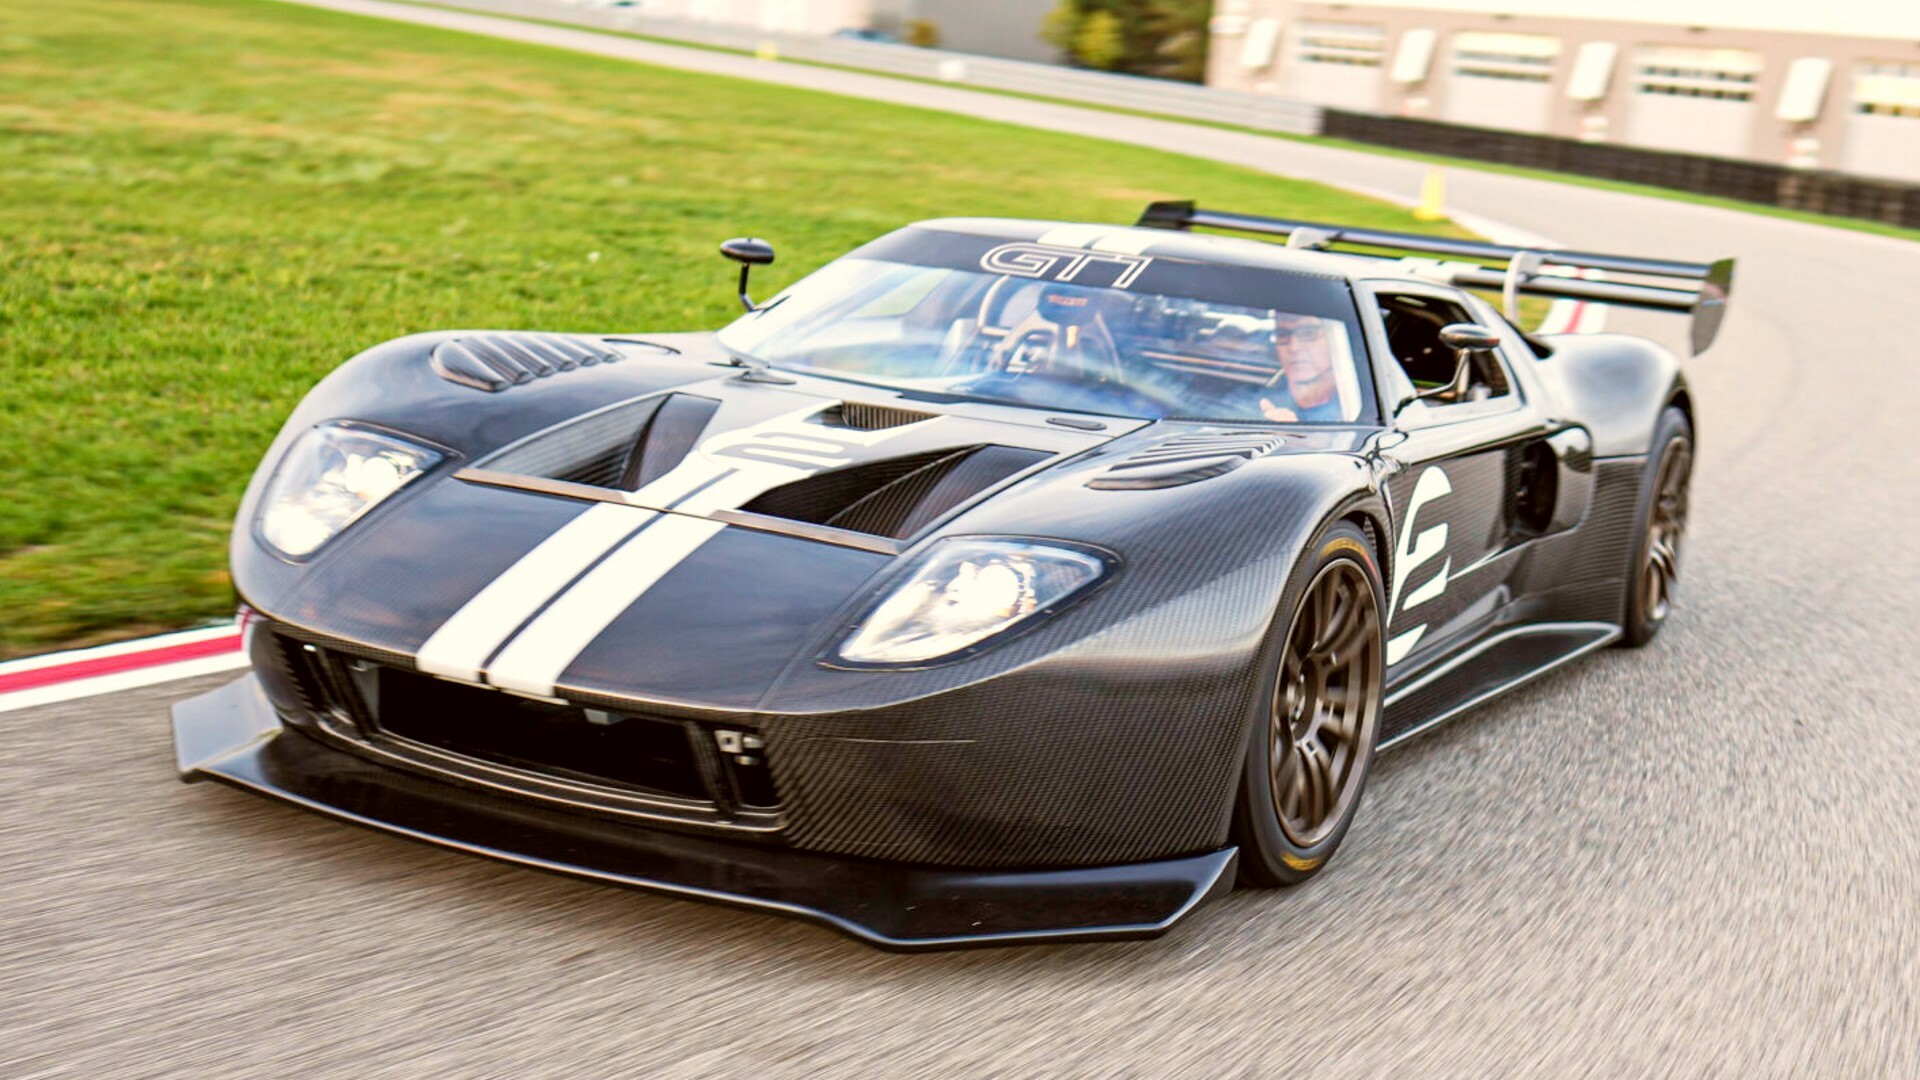 Michigan-based GT1 to convert 30 Ford GT chassis into 1000+ hp track  weapons - Hagerty Media